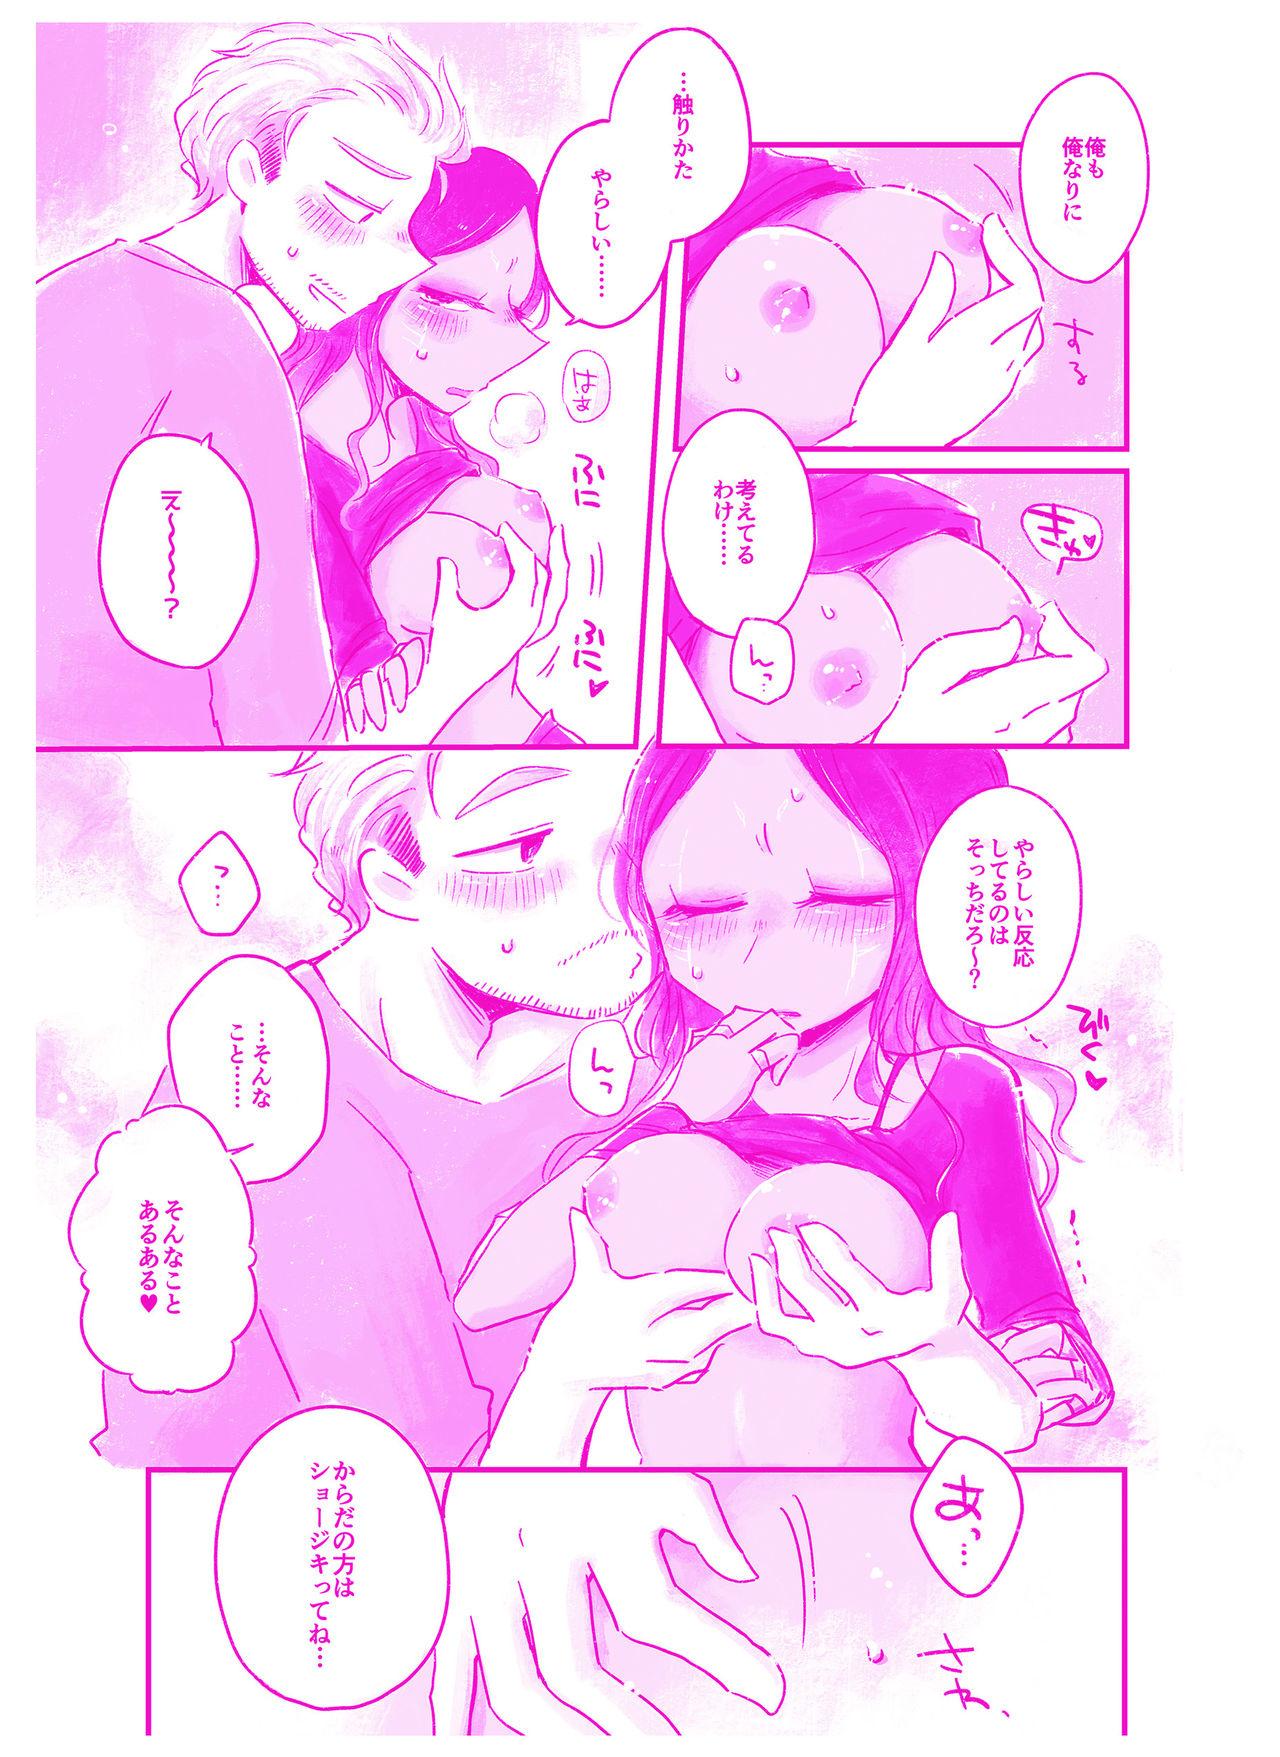 Ass Worship 言われてみてえもんだ - Guardians of the galaxy Missionary - Page 6